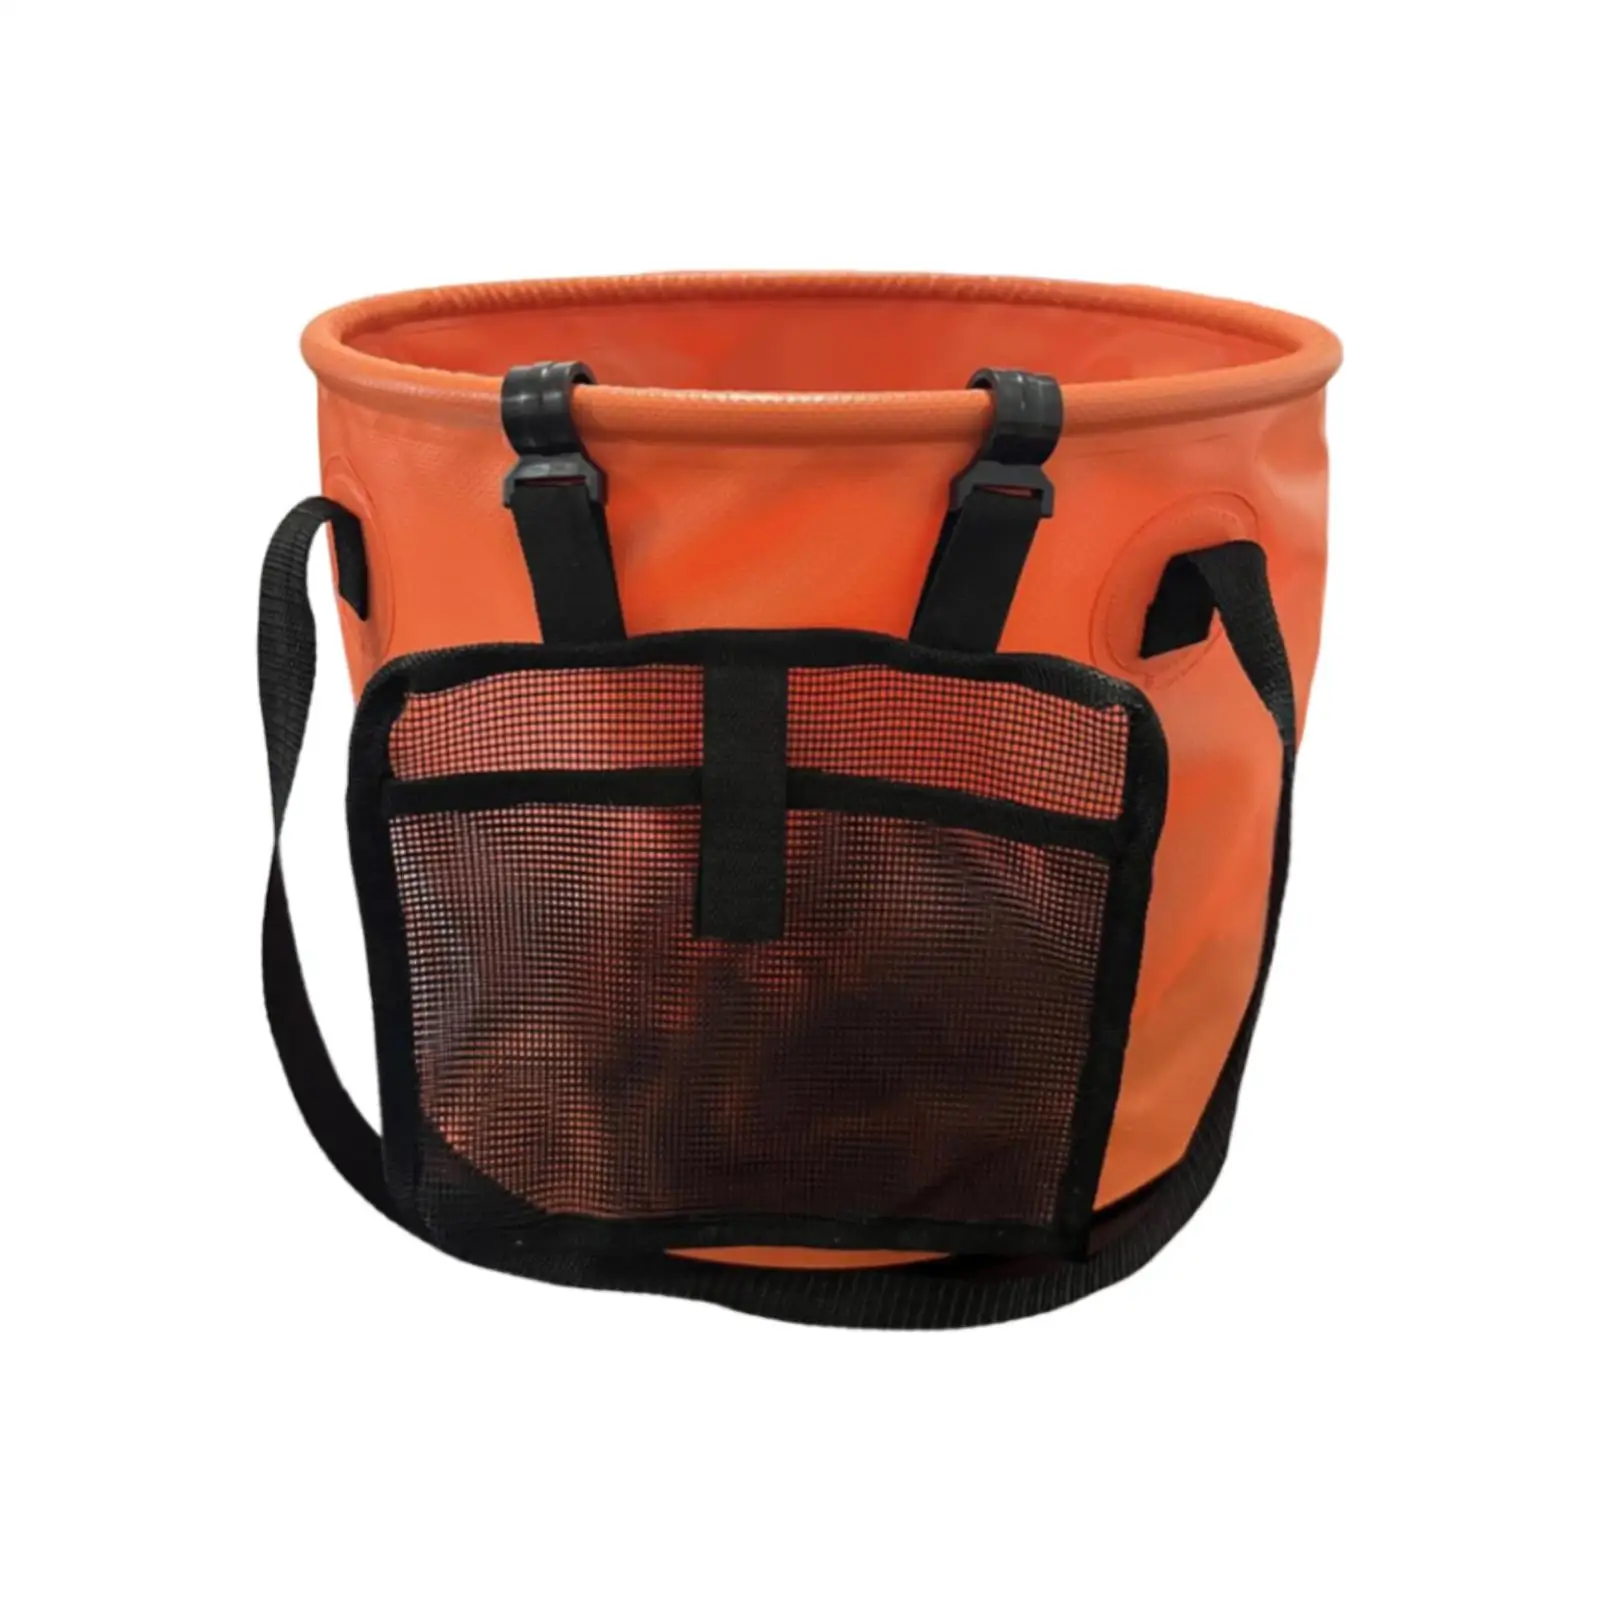 Collapsible Bucket Folding Portable Multifunctional 28L Folding Water Storage Bucket for Camping Travel Fishing Boating Outdoor